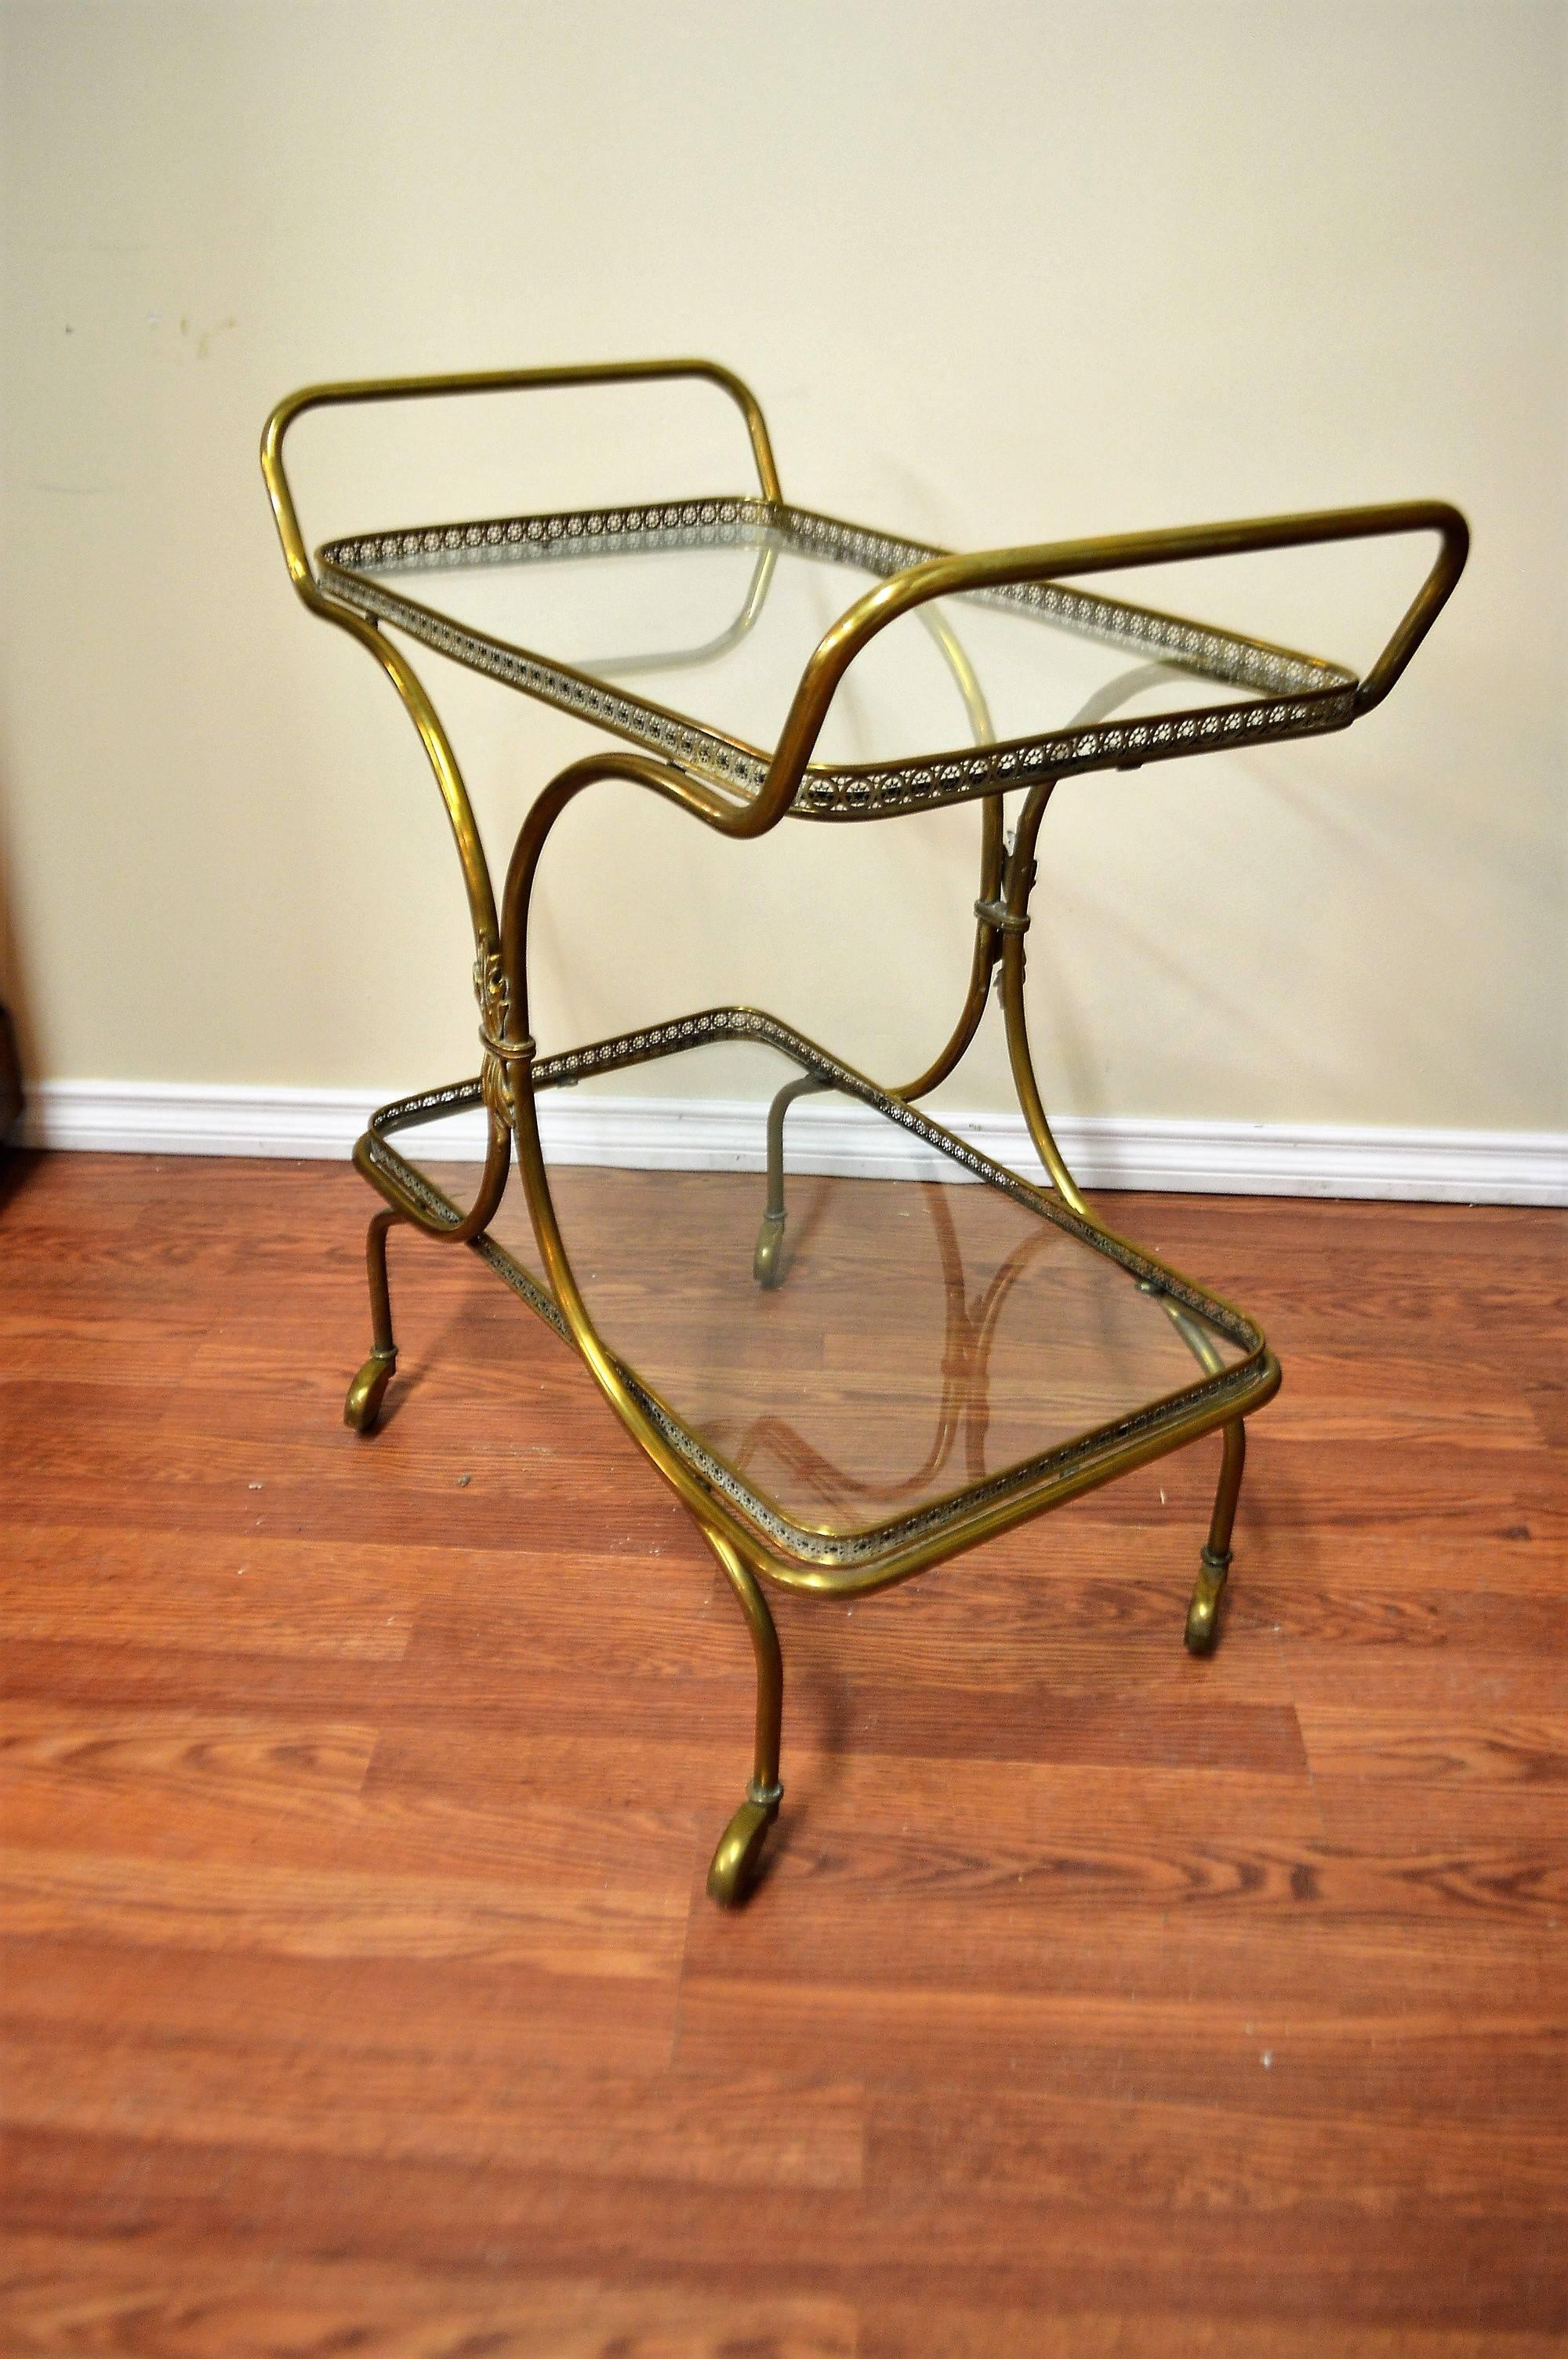 European Neoclassic Style, Decorative Brass Bar Cart with Two Glass Trays In Excellent Condition For Sale In Oakville, ON